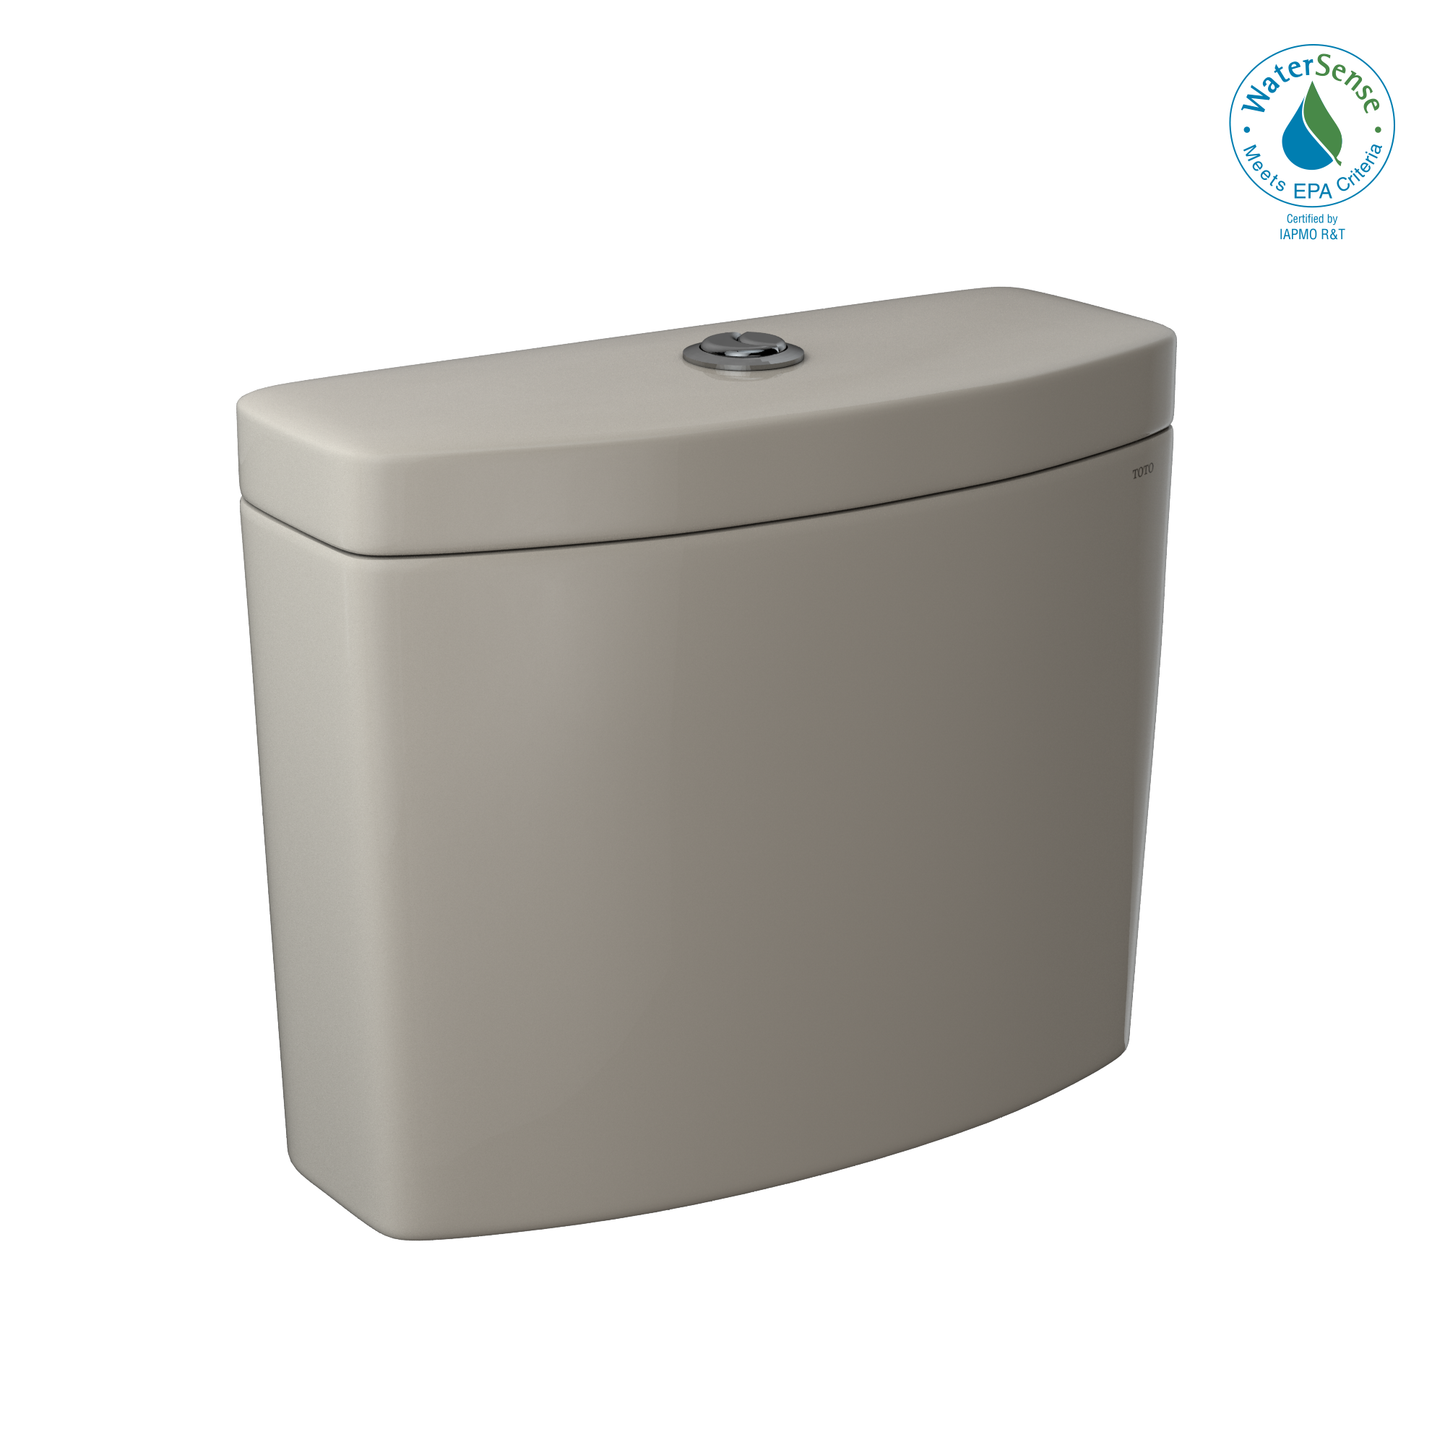 TOTO® Aquia® IV Dual Flush 1.28 and 0.9 GPF Toilet Tank Only with WASHLET®+ Auto Flush Compatibility - ST446EMNA